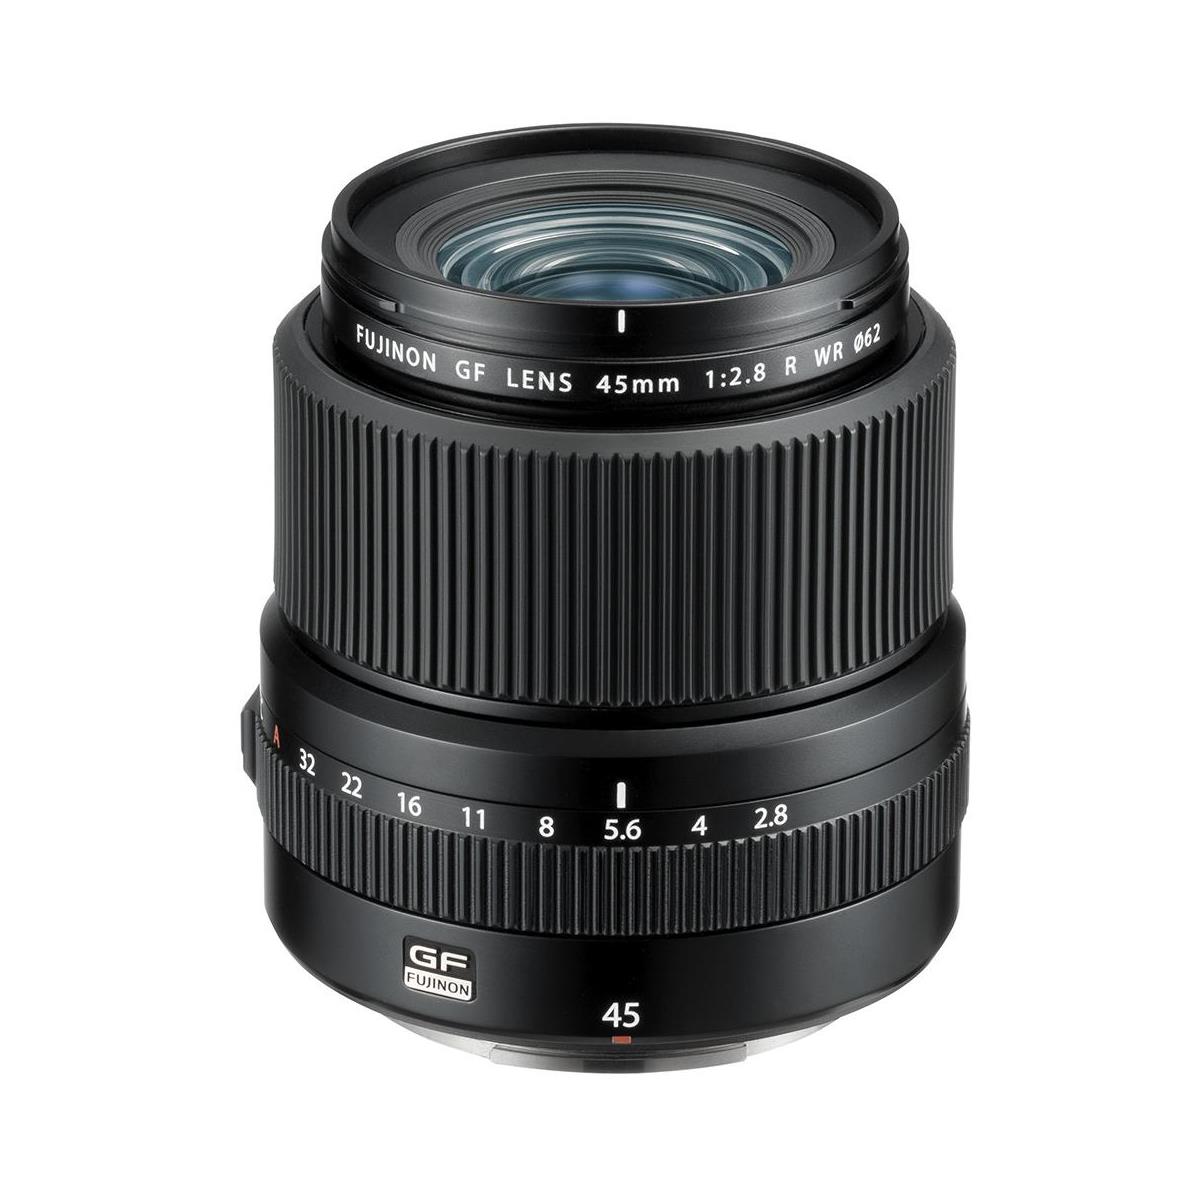 Fujifilm FUJINON GF 45mm F2.8 R WR Lens (36mm in 35mm equivalent) - Thanks to its compact and lightweight design (weighing only 490g), and the wide aperture of f/2.8 this lens is ideal for street and documentary photography. It is Weather and Dust Resistant.